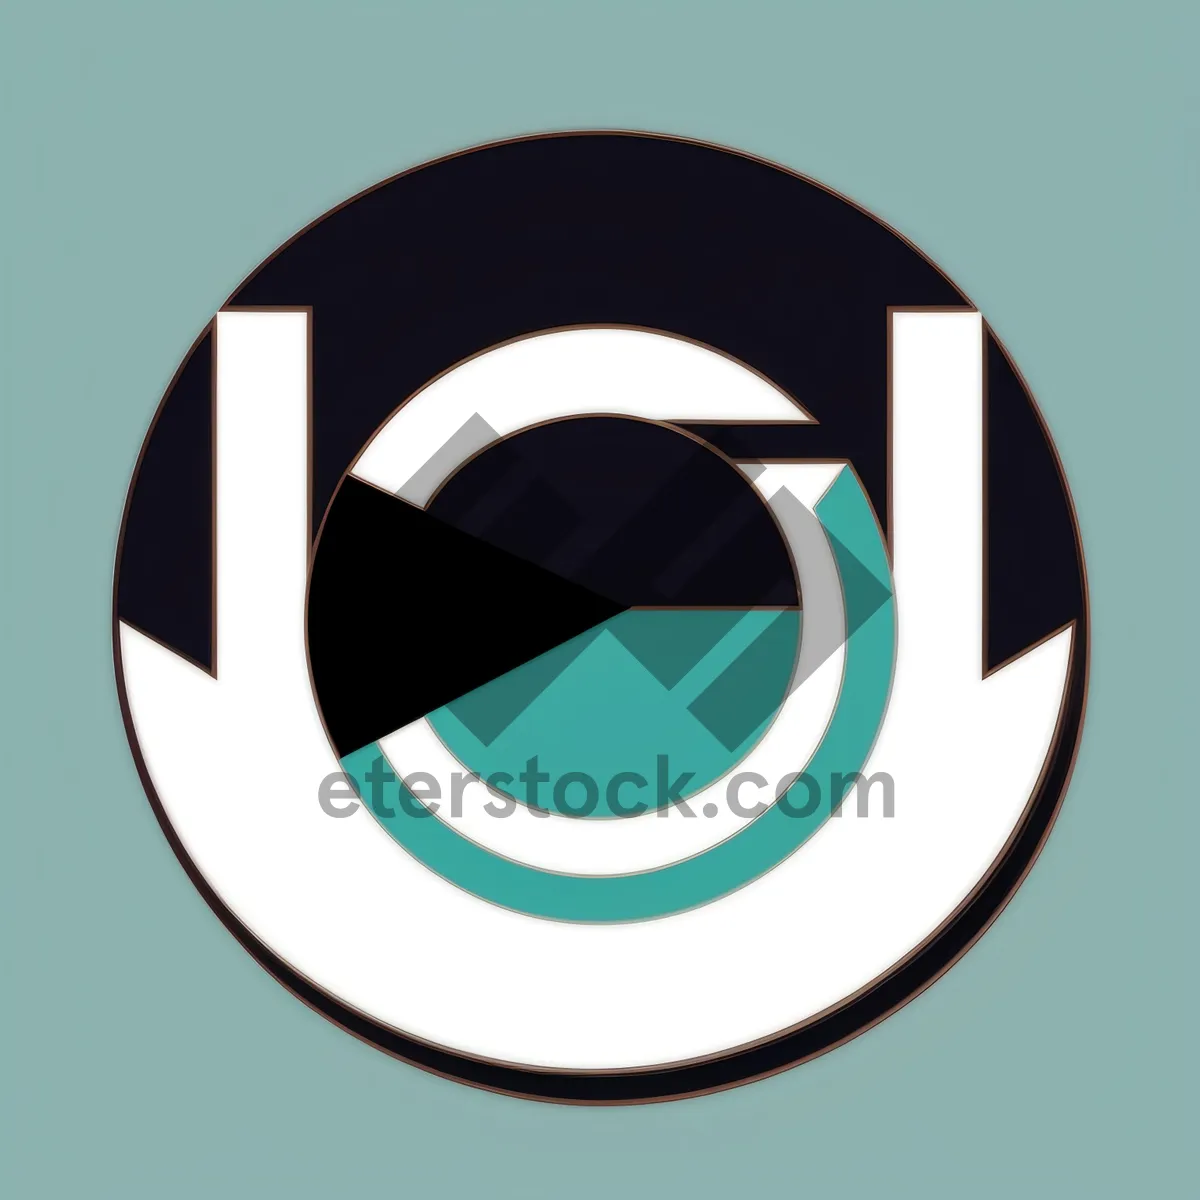 Picture of Glossy Round Web Icons Set